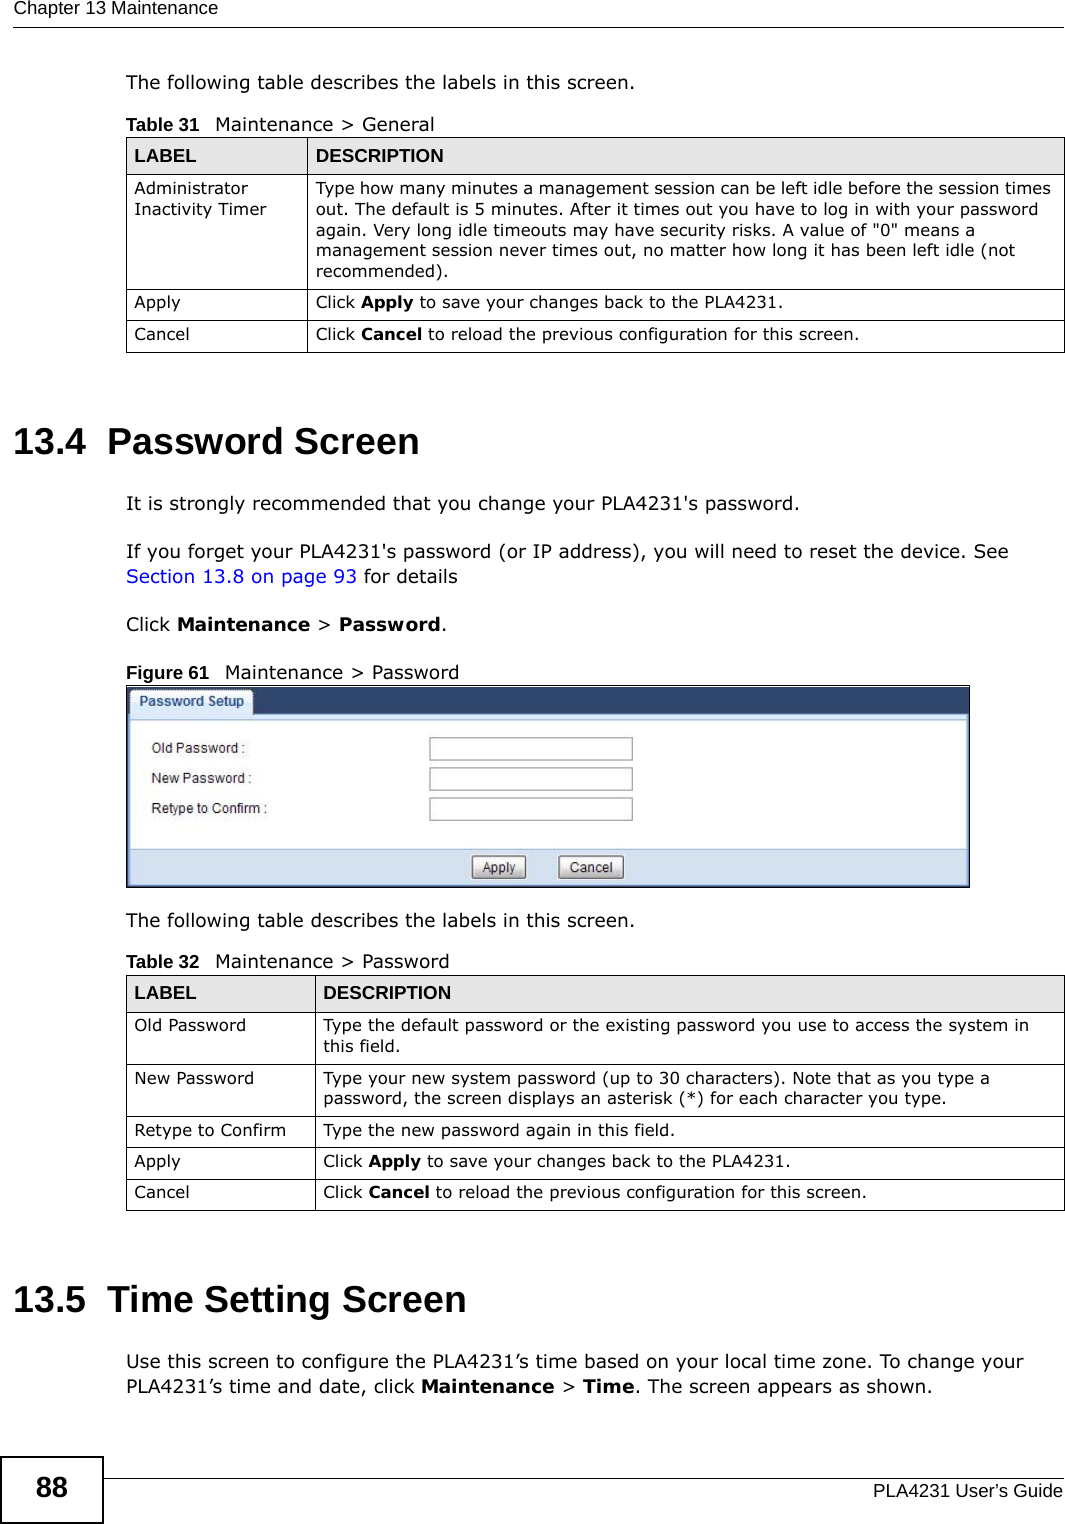 Chapter 13 MaintenancePLA4231 User’s Guide88The following table describes the labels in this screen.13.4  Password ScreenIt is strongly recommended that you change your PLA4231&apos;s password.  If you forget your PLA4231&apos;s password (or IP address), you will need to reset the device. See Section 13.8 on page 93 for detailsClick Maintenance &gt; Password.Figure 61   Maintenance &gt; Password The following table describes the labels in this screen.13.5  Time Setting ScreenUse this screen to configure the PLA4231’s time based on your local time zone. To change your PLA4231’s time and date, click Maintenance &gt; Time. The screen appears as shown. Table 31   Maintenance &gt; GeneralLABEL DESCRIPTIONAdministrator Inactivity TimerType how many minutes a management session can be left idle before the session times out. The default is 5 minutes. After it times out you have to log in with your password again. Very long idle timeouts may have security risks. A value of &quot;0&quot; means a management session never times out, no matter how long it has been left idle (not recommended).Apply Click Apply to save your changes back to the PLA4231.Cancel Click Cancel to reload the previous configuration for this screen.Table 32   Maintenance &gt; PasswordLABEL DESCRIPTIONOld Password Type the default password or the existing password you use to access the system in this field.New Password Type your new system password (up to 30 characters). Note that as you type a password, the screen displays an asterisk (*) for each character you type.Retype to Confirm Type the new password again in this field.Apply Click Apply to save your changes back to the PLA4231.Cancel Click Cancel to reload the previous configuration for this screen.